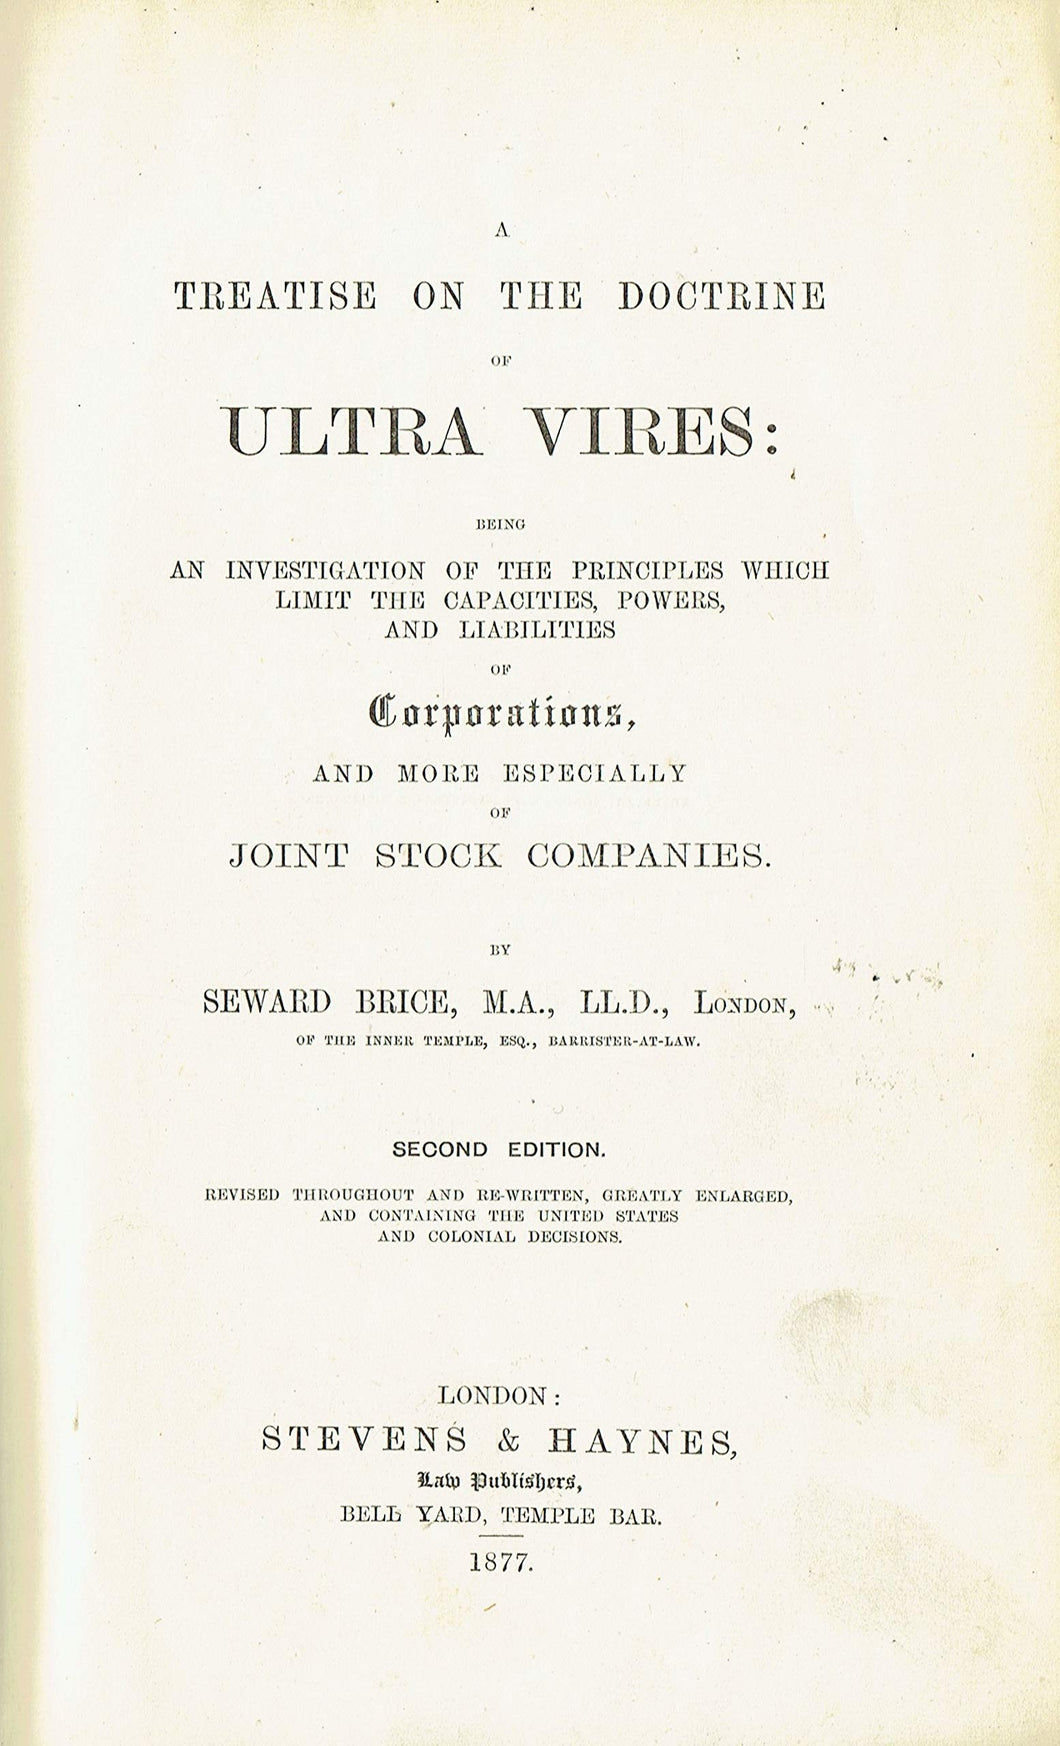 Brice on the Doctrine of Ultra Vires - A Treatise on the Doctrine of Ultra Vires - Second Edition/2nd Edition